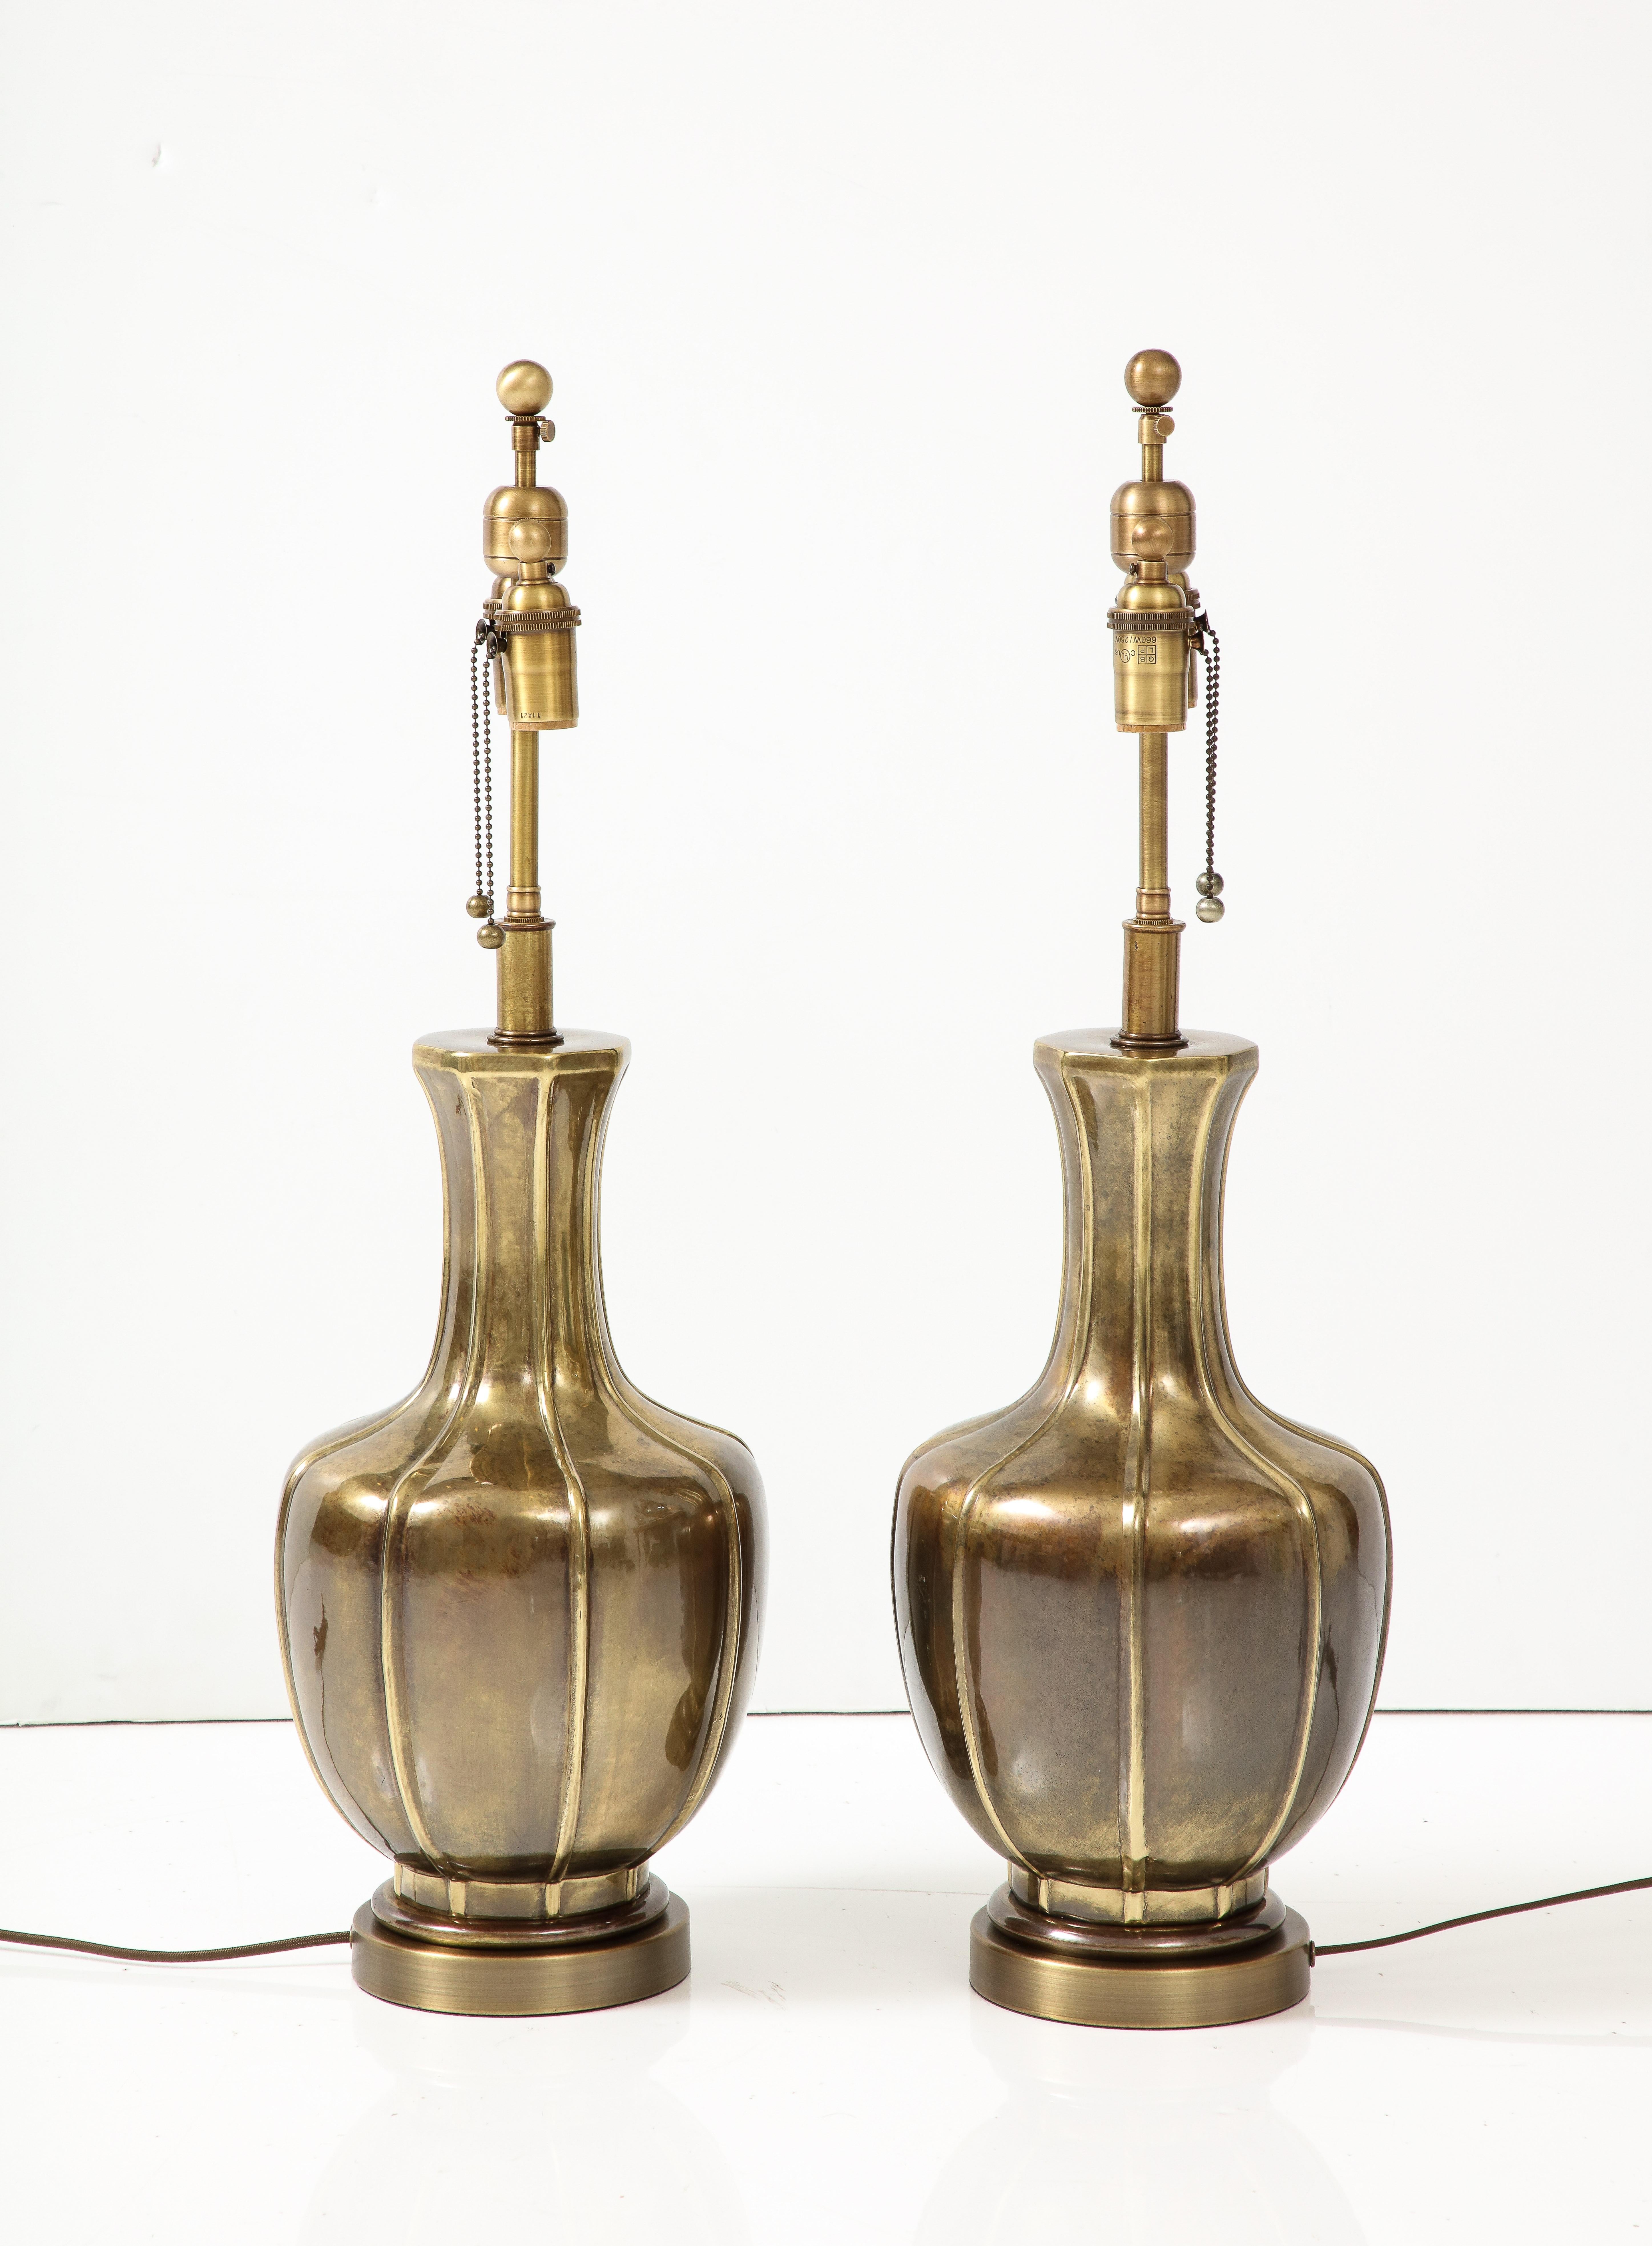 North American Pair of Midcentury Antique Brass Lamps by Frederick Cooper For Sale